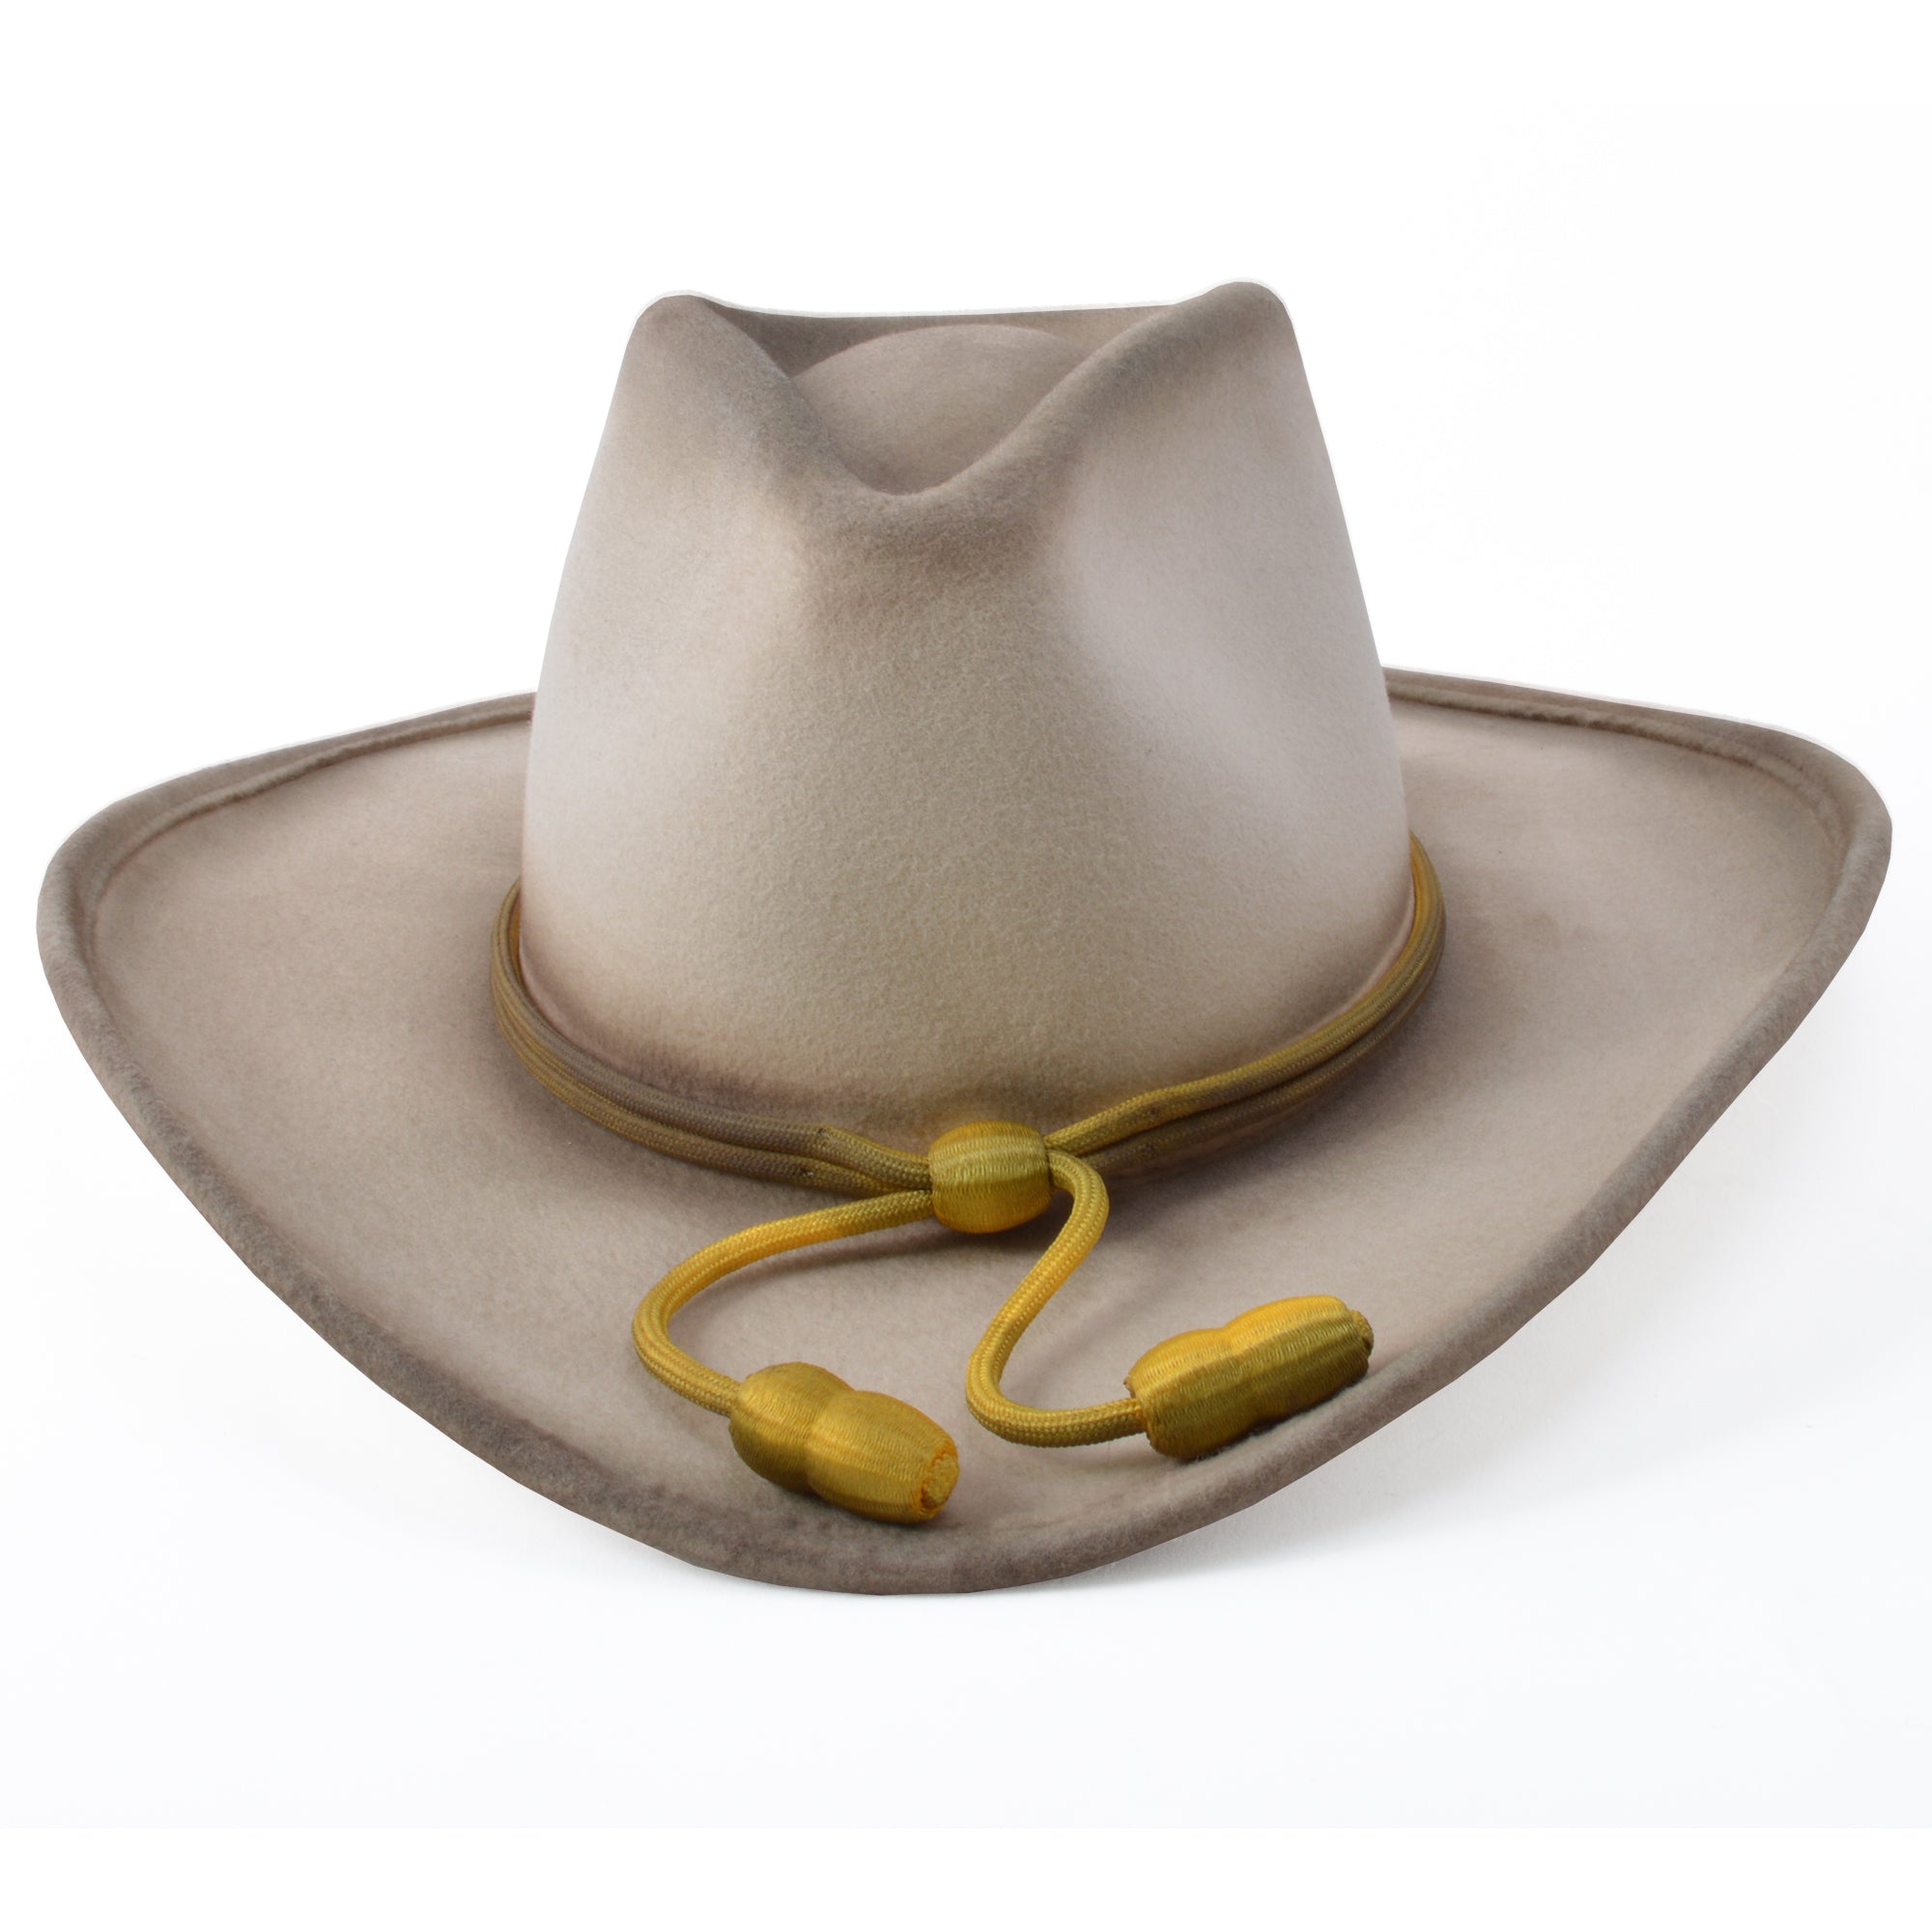 Stetson Wool John Wayne Fort Crushable Hat in Silver Belly